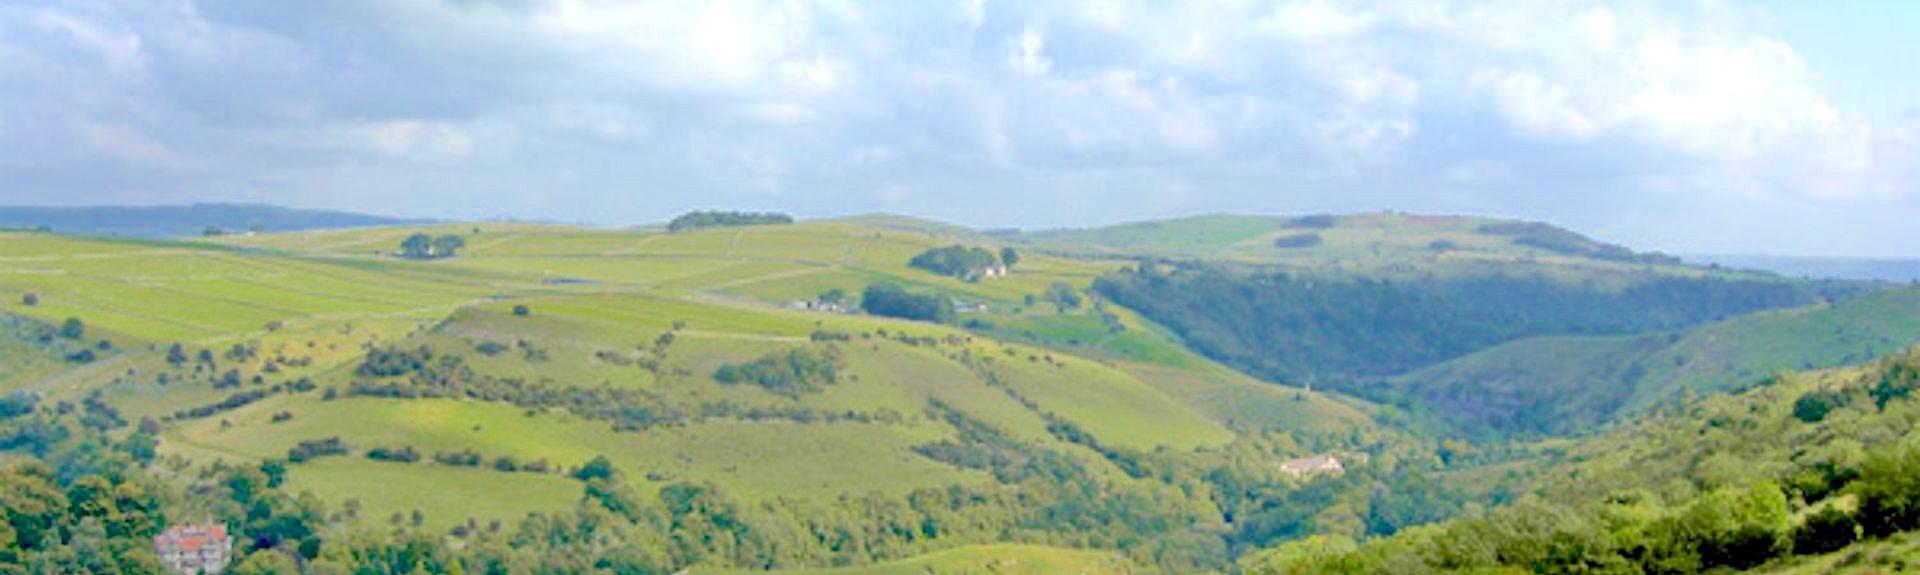 A large Peak District valley with fields and trees toped by moorland